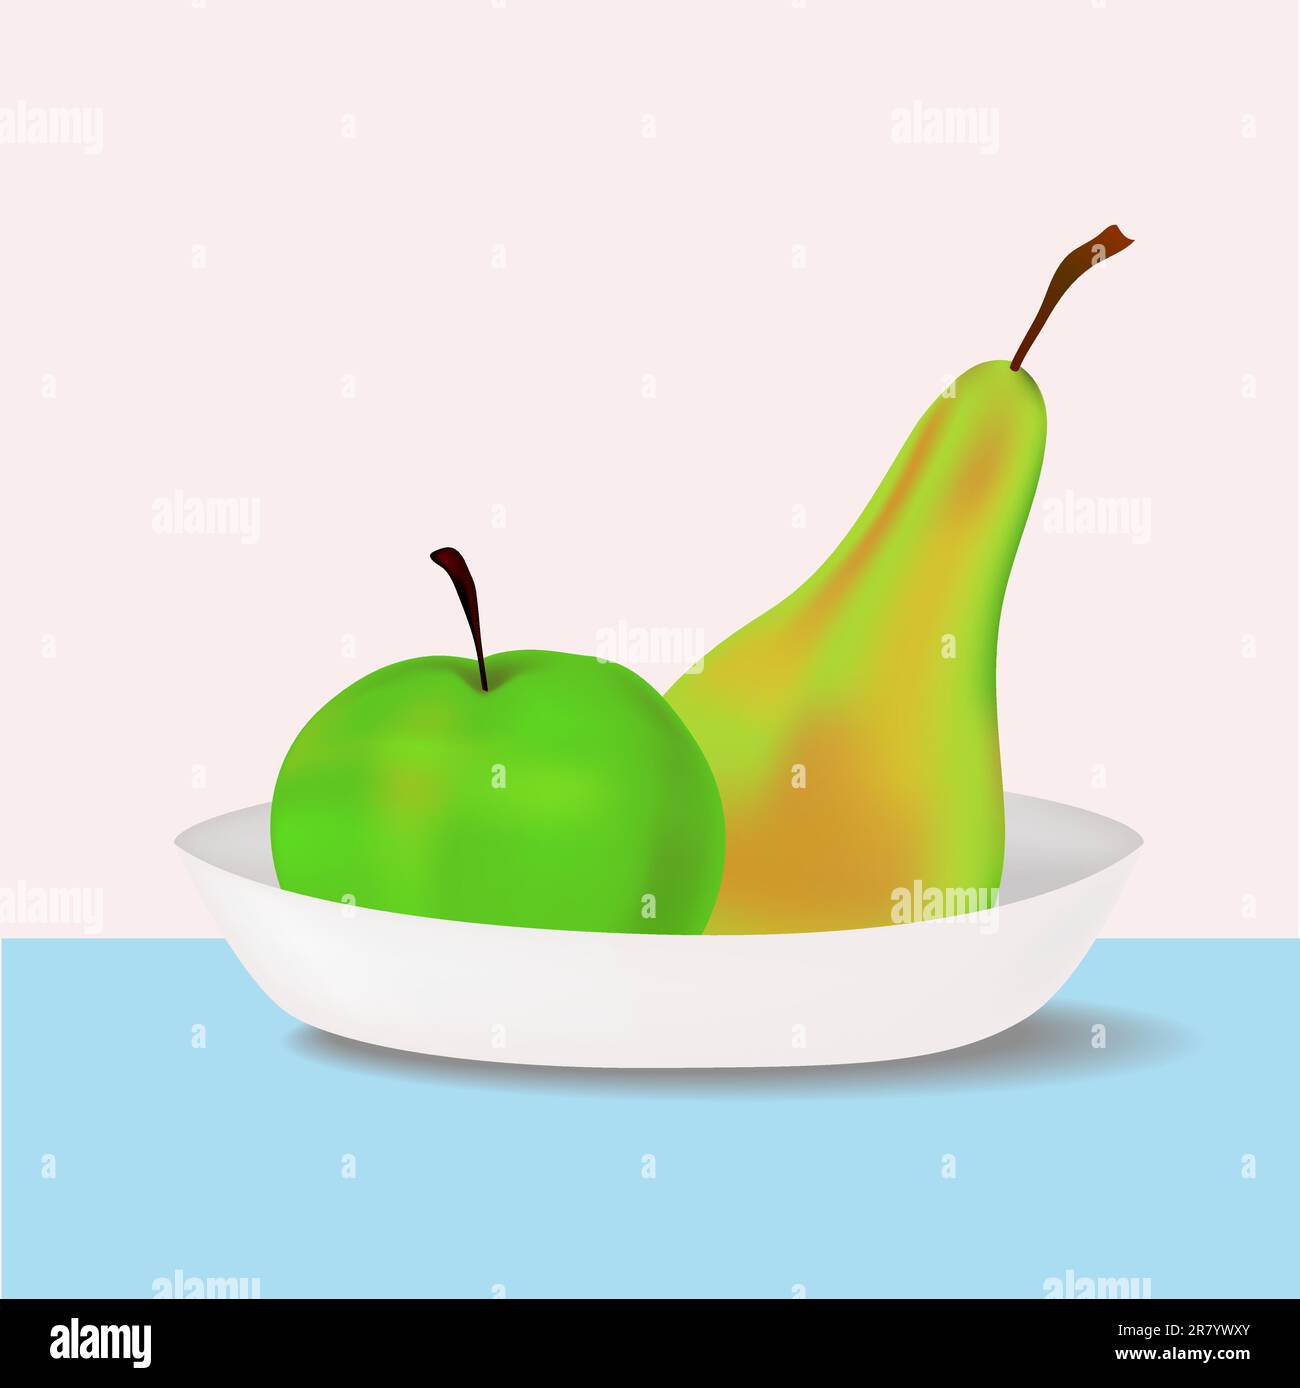 Illustration of the fruits - apple and pear - vector. This file is vector, can be scaled to any size without loss of quality. Stock Vector